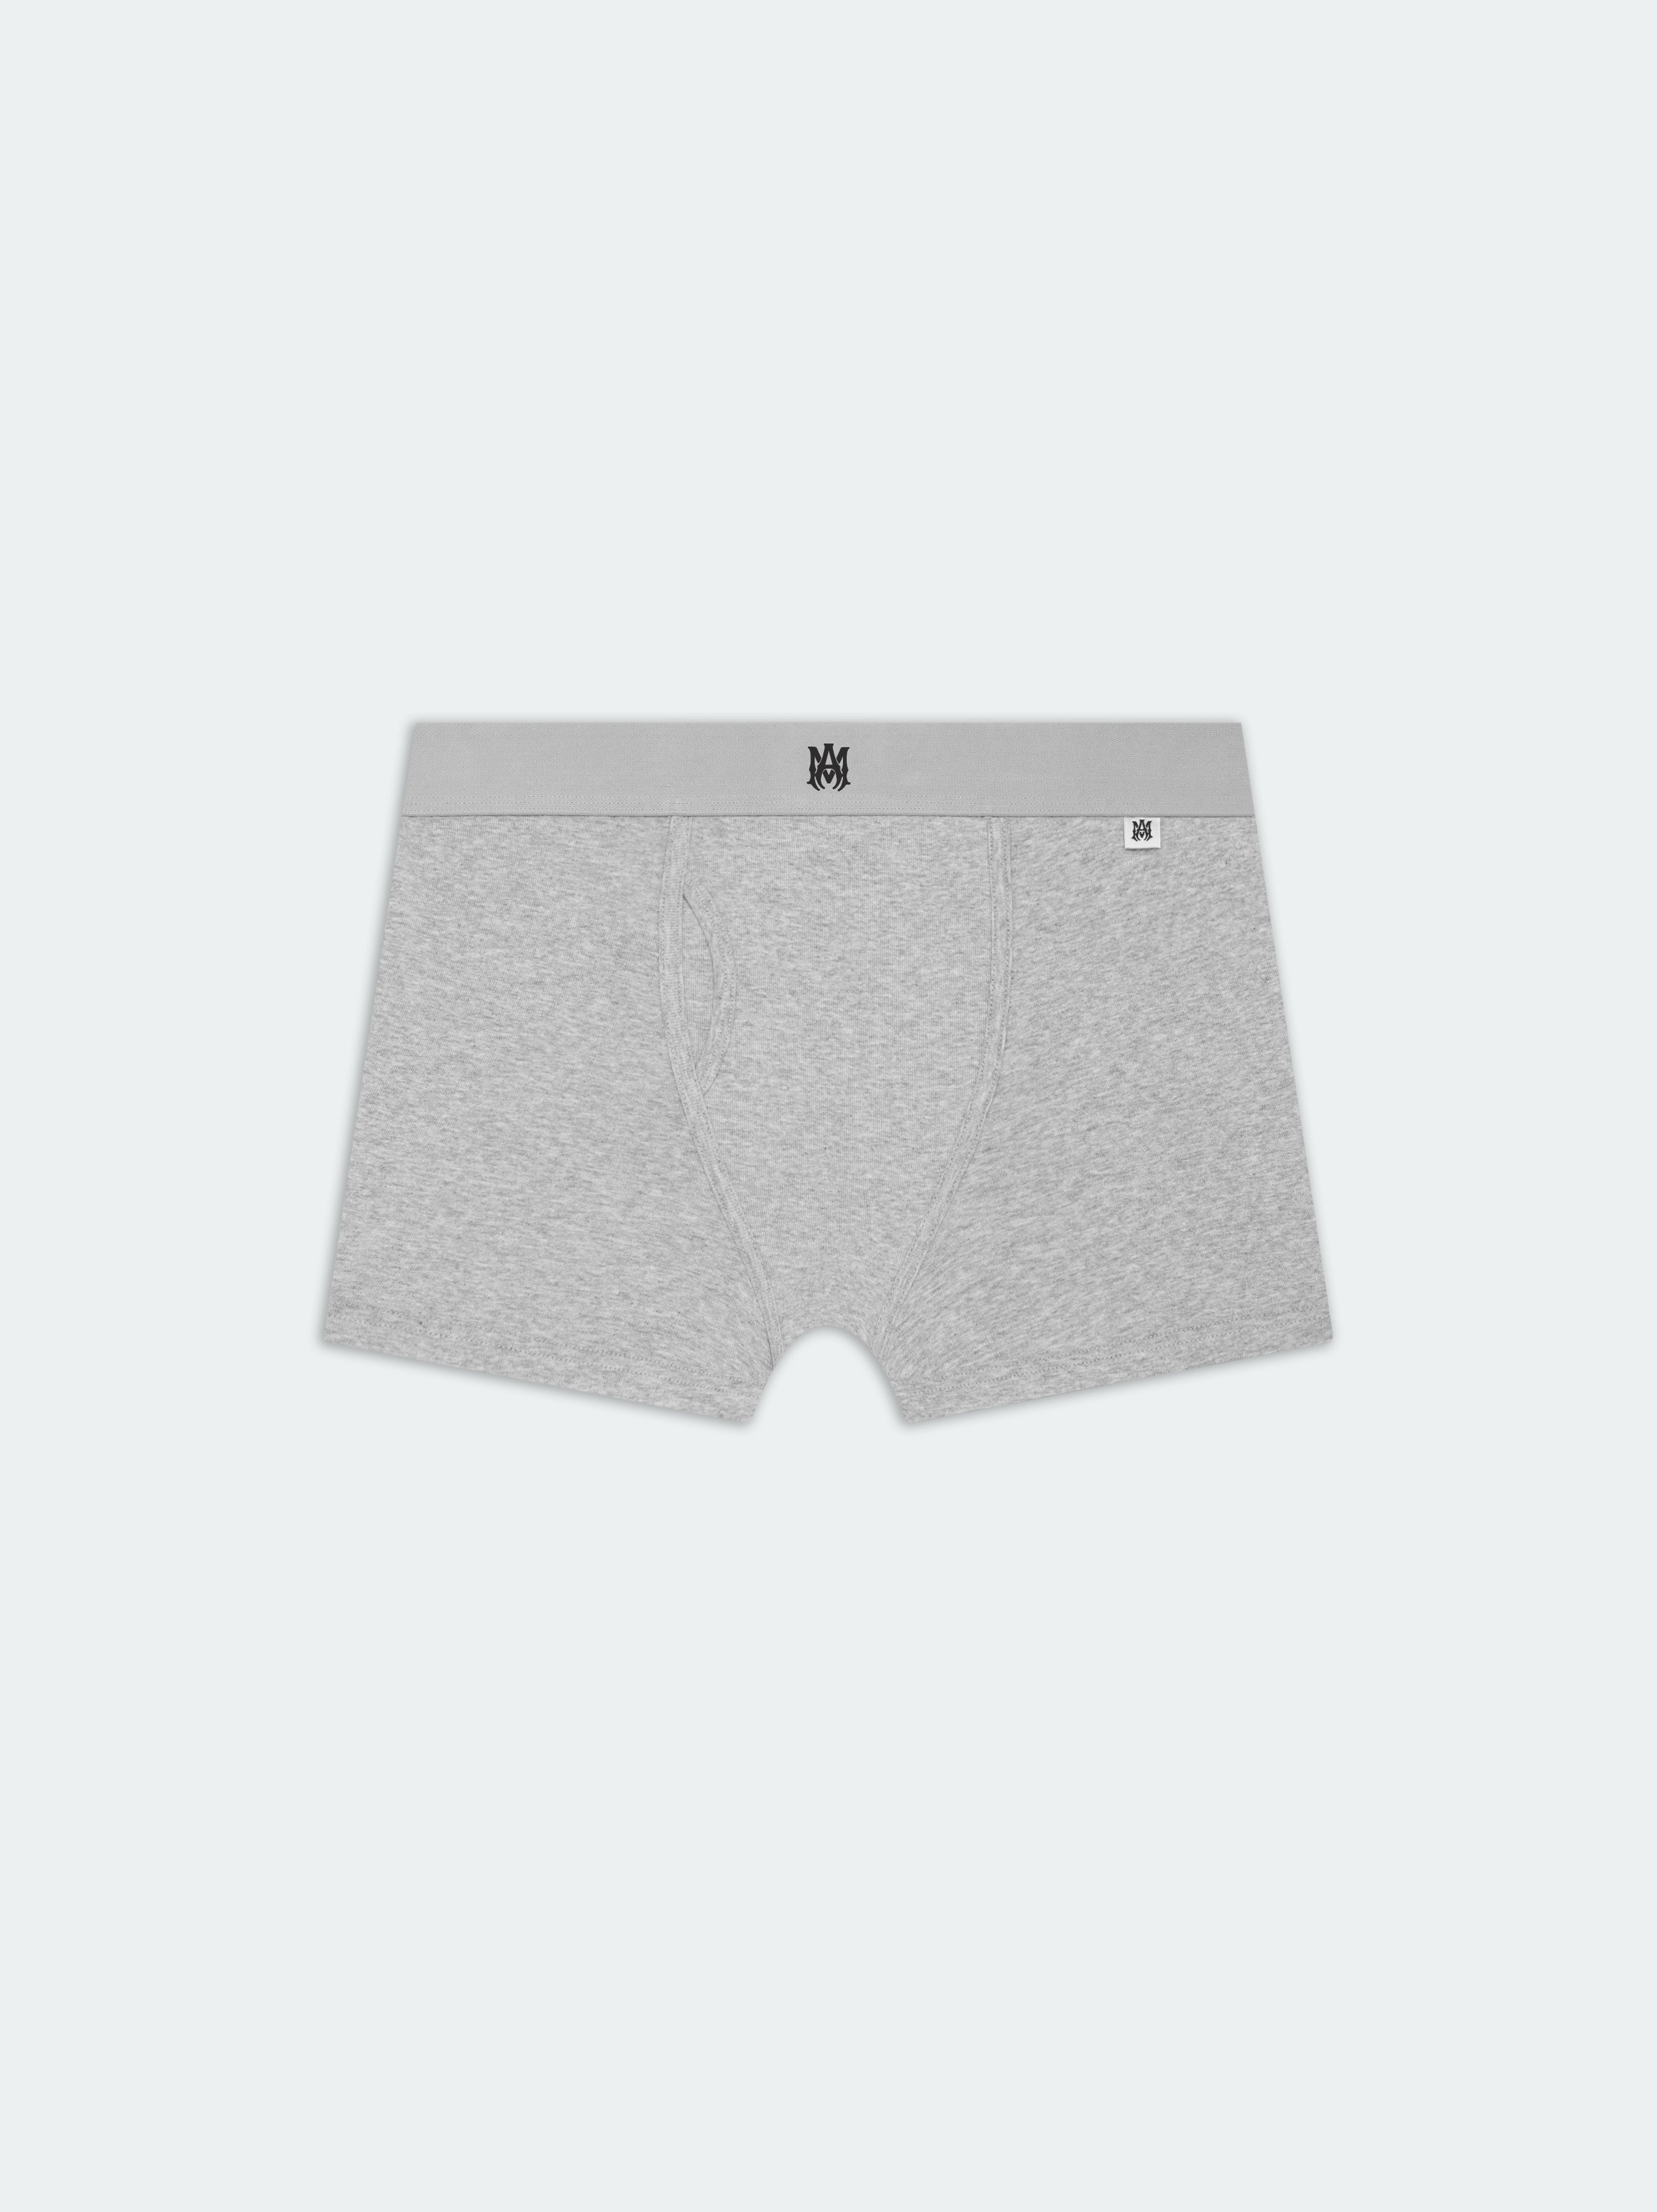 Product MA LOGO BRIEF - Heather Grey featured image